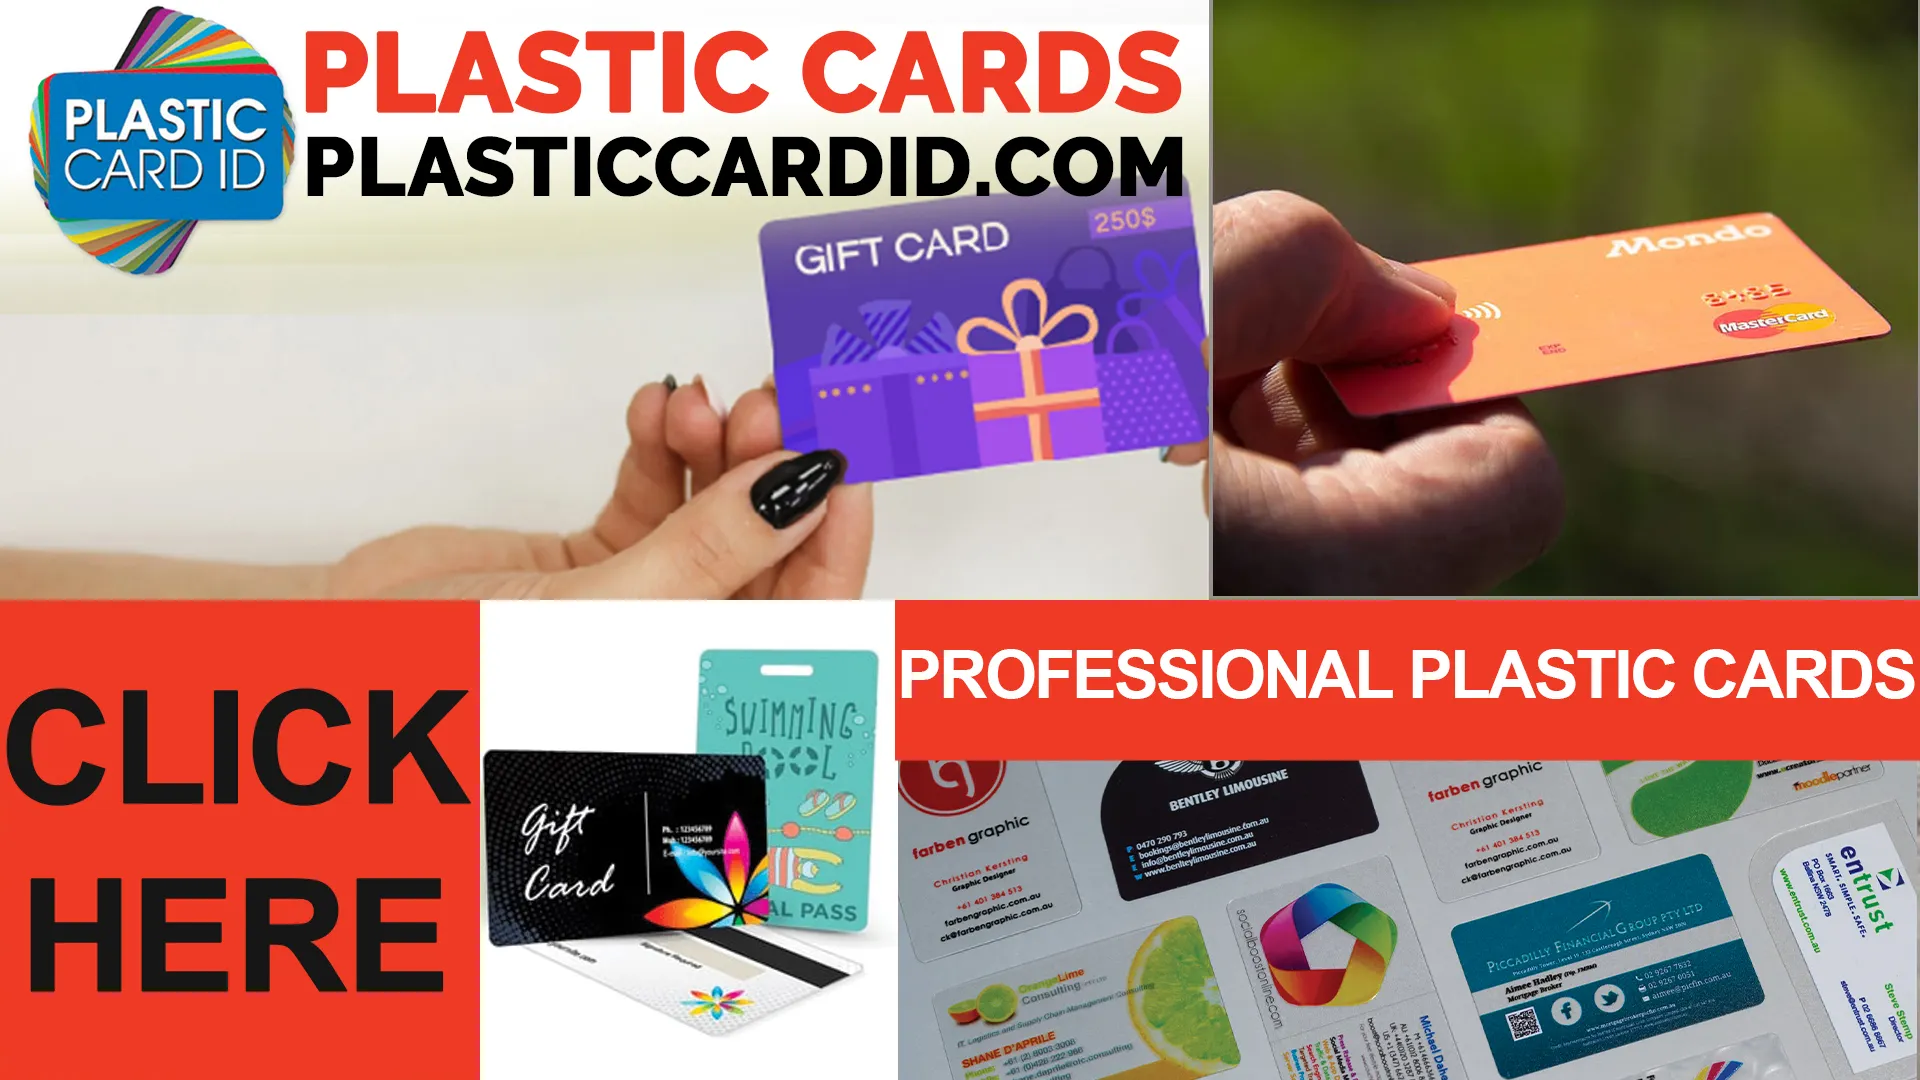 Welcome to the World of Hassle-Free Global Card Distribution